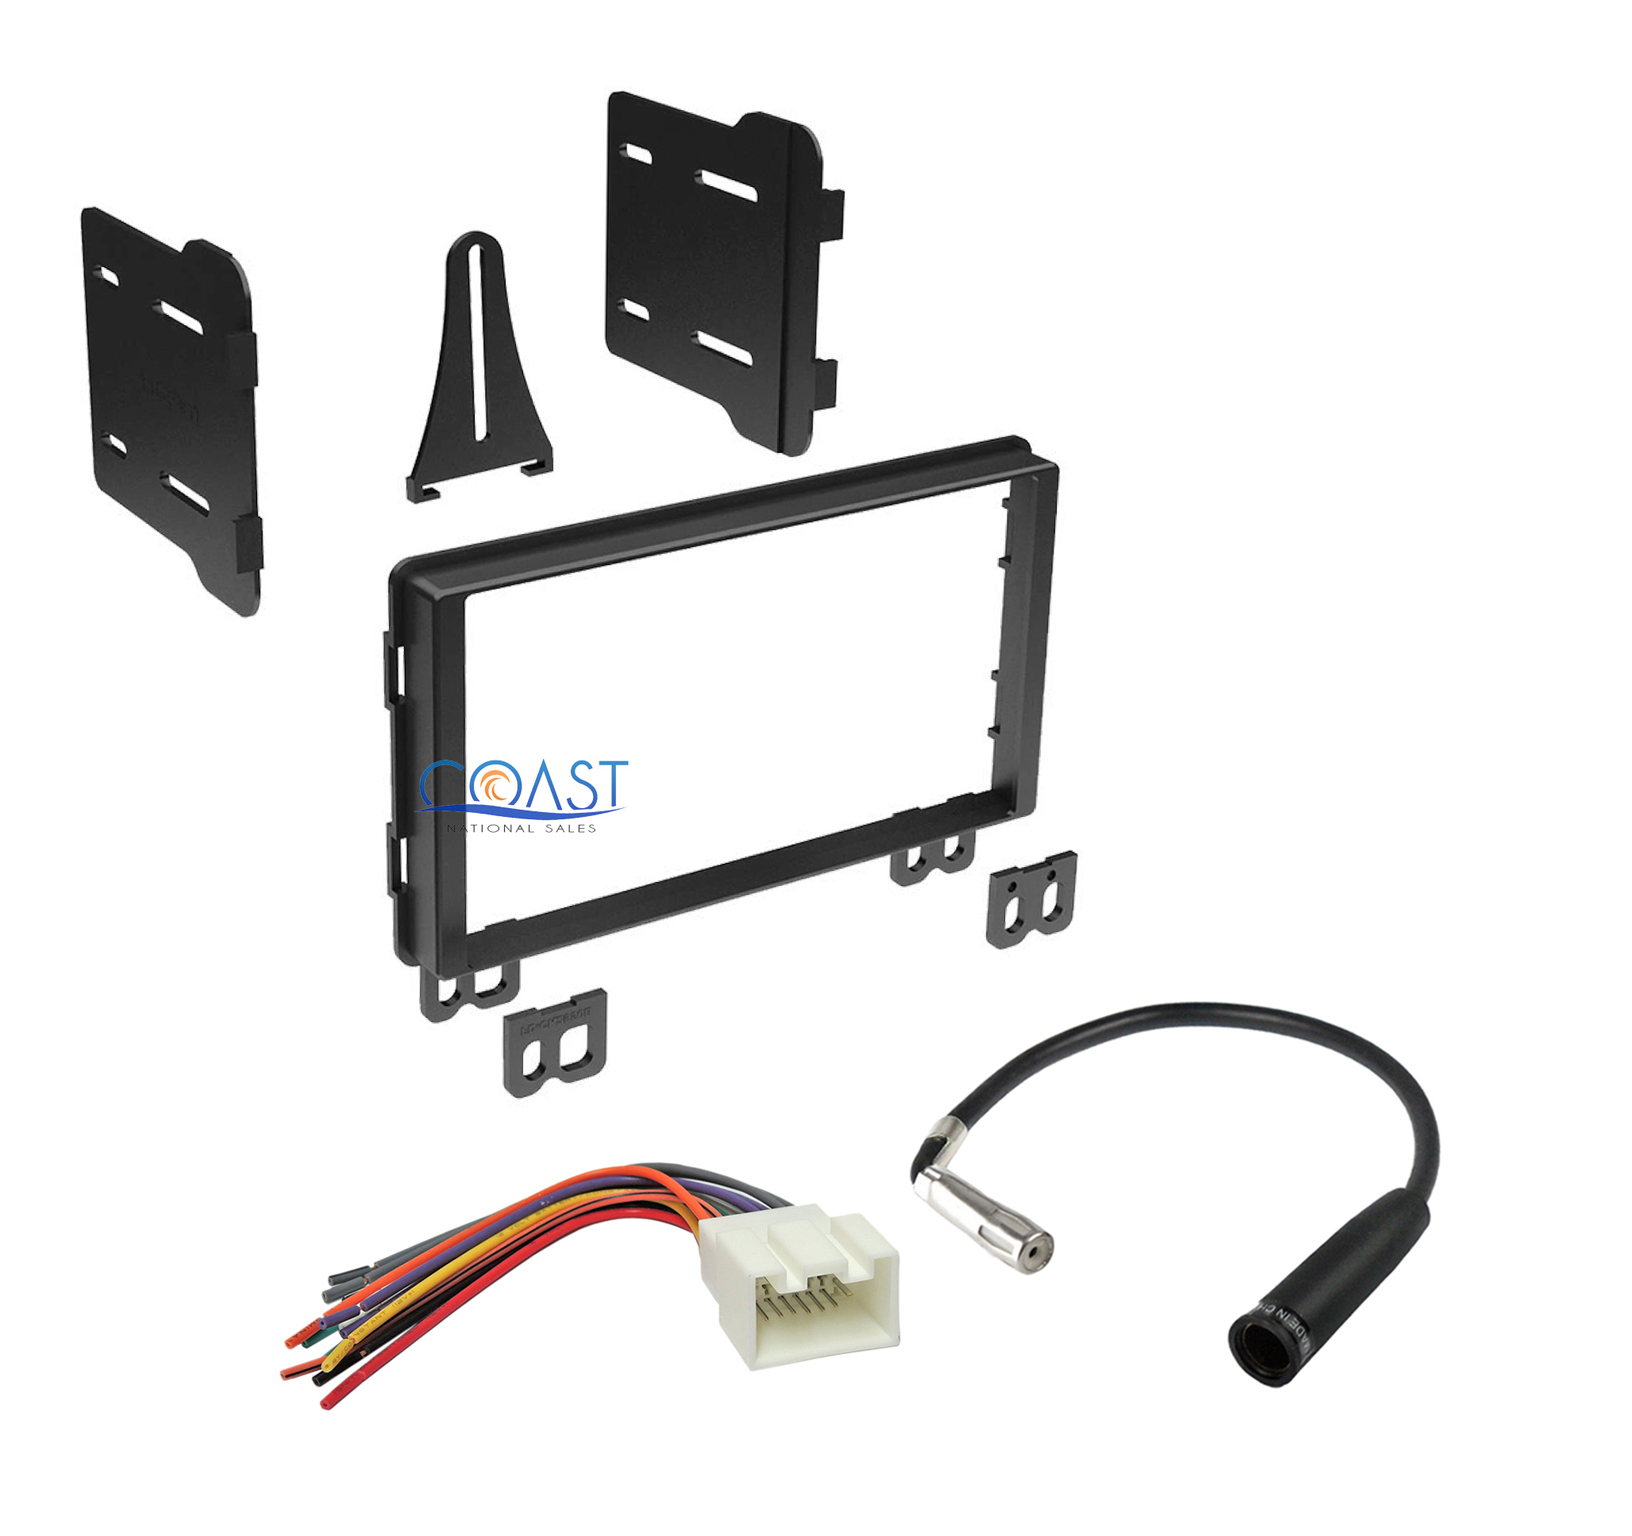 Double DIN Stereo Dash Kit Harness + Antenna for 2001-2006 ... scosche wiring harness color code 